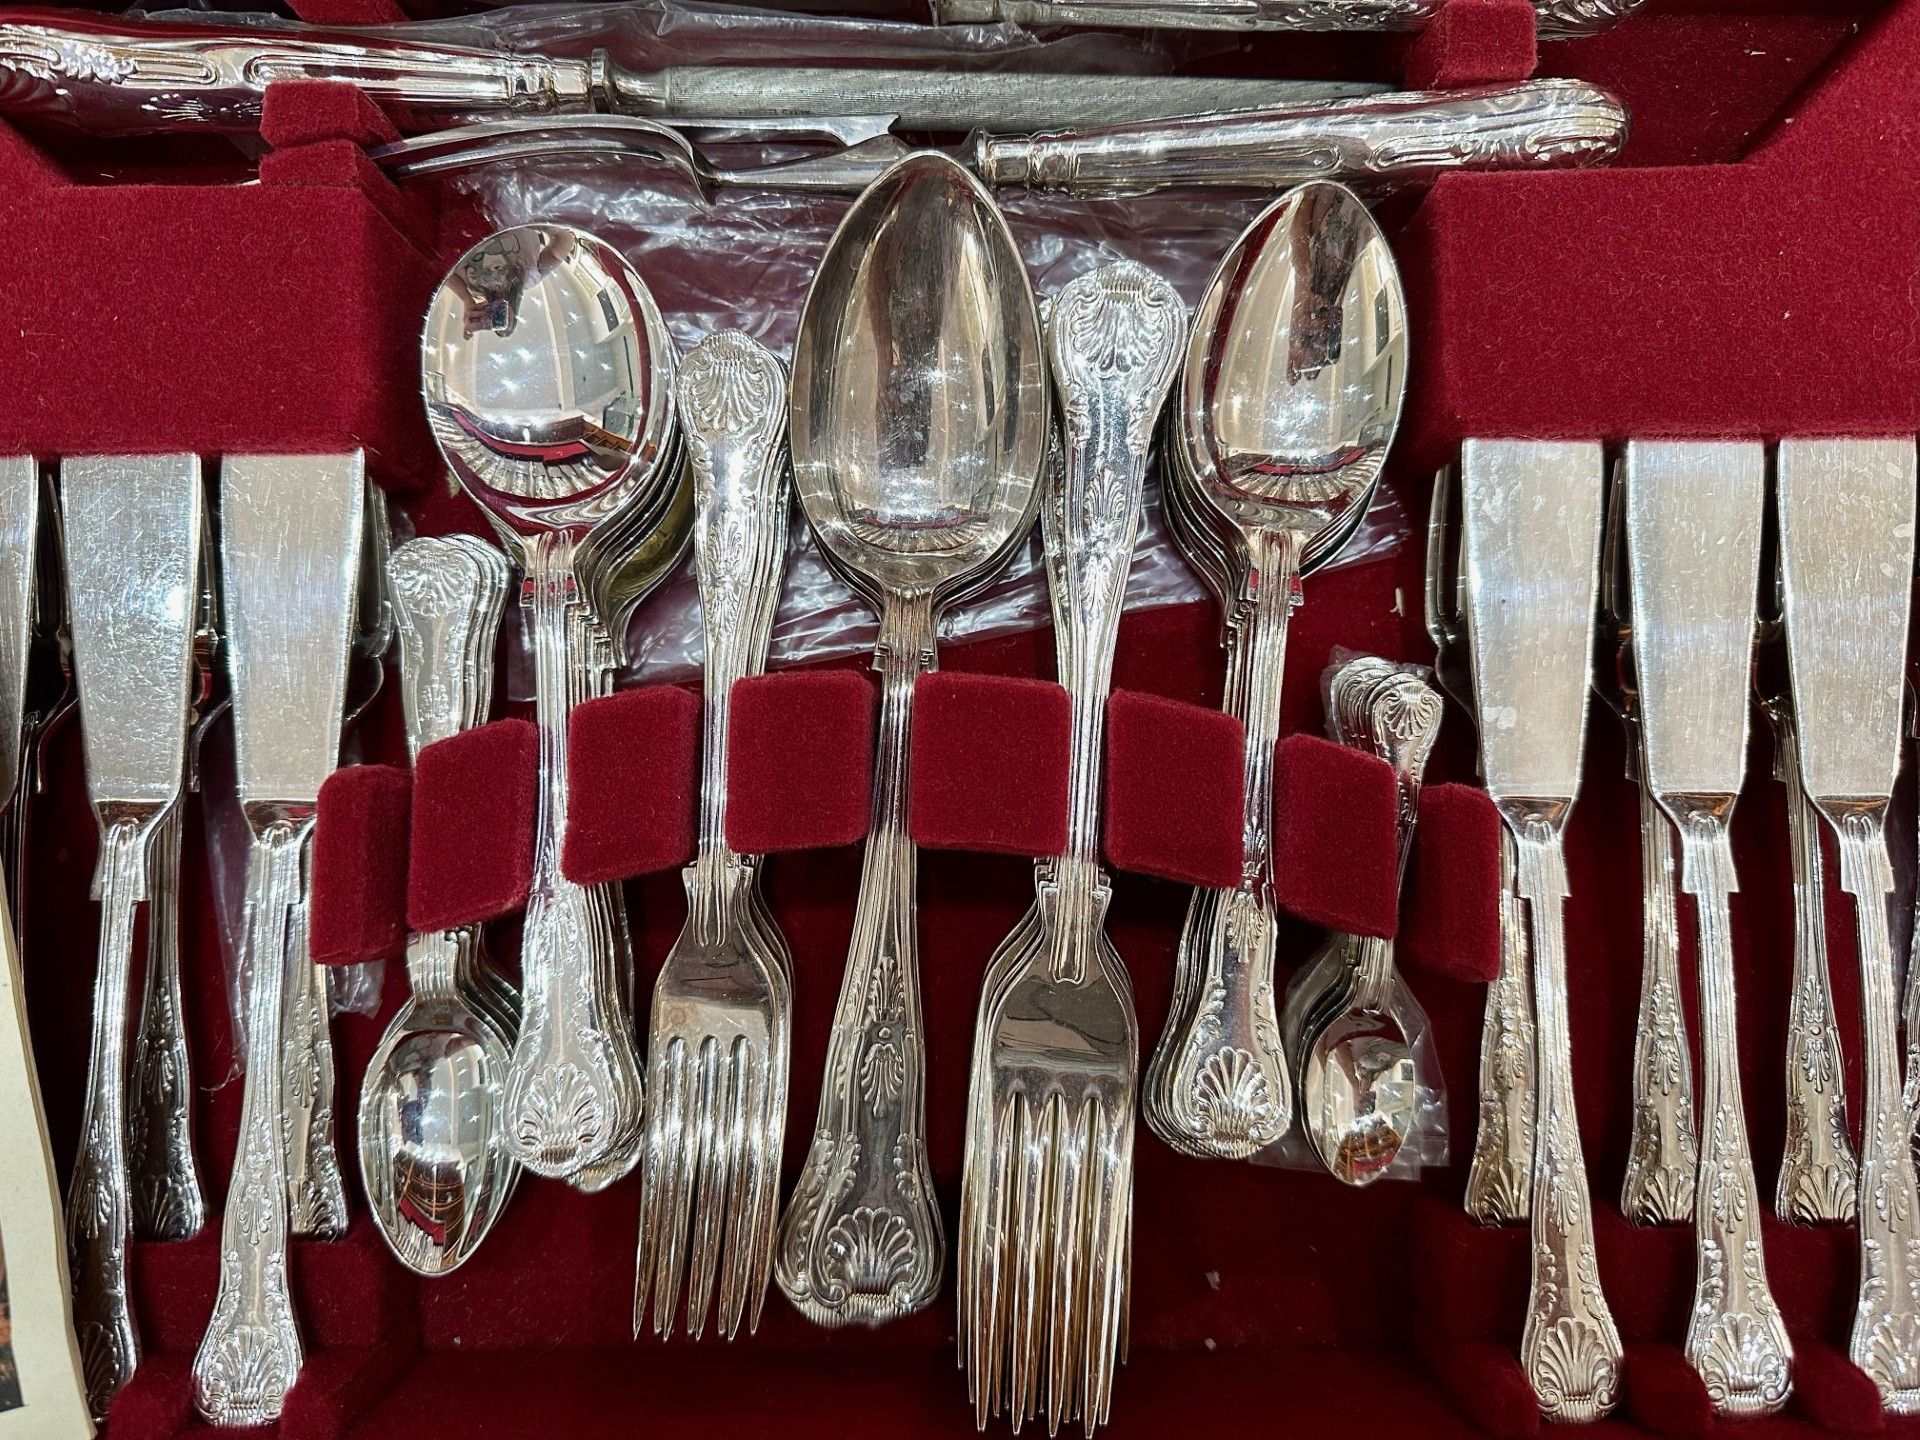 Canteen of Cutlery by Butler the Cutler, silver plated, King's Pattern, in fitted mahogany case, - Image 2 of 3